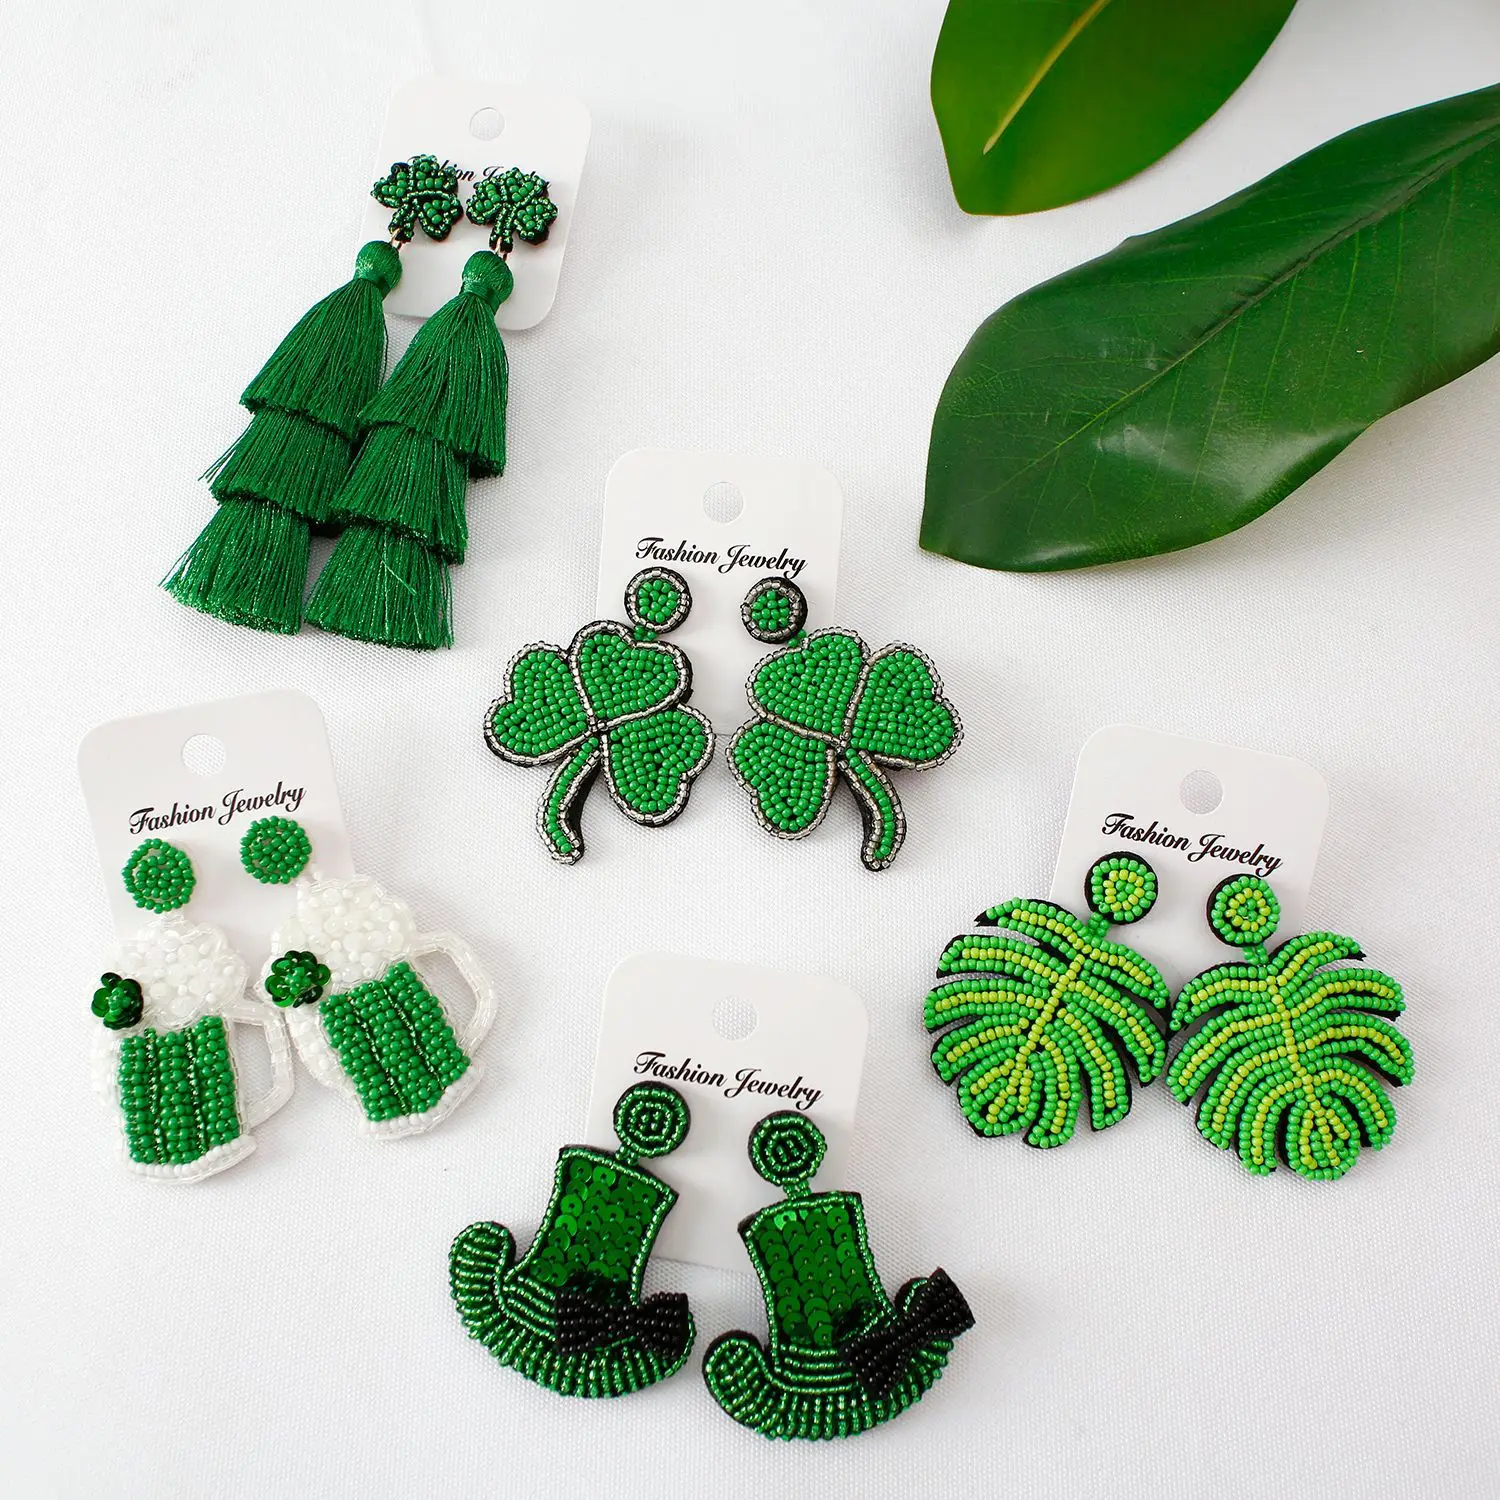 GREEN ST. PATRICK'S DAY SEED BEAD EARRINGS FOR WOMEN Triple Shamrock Clover St Paddys Earrings Luck of the Irish March Jewelry